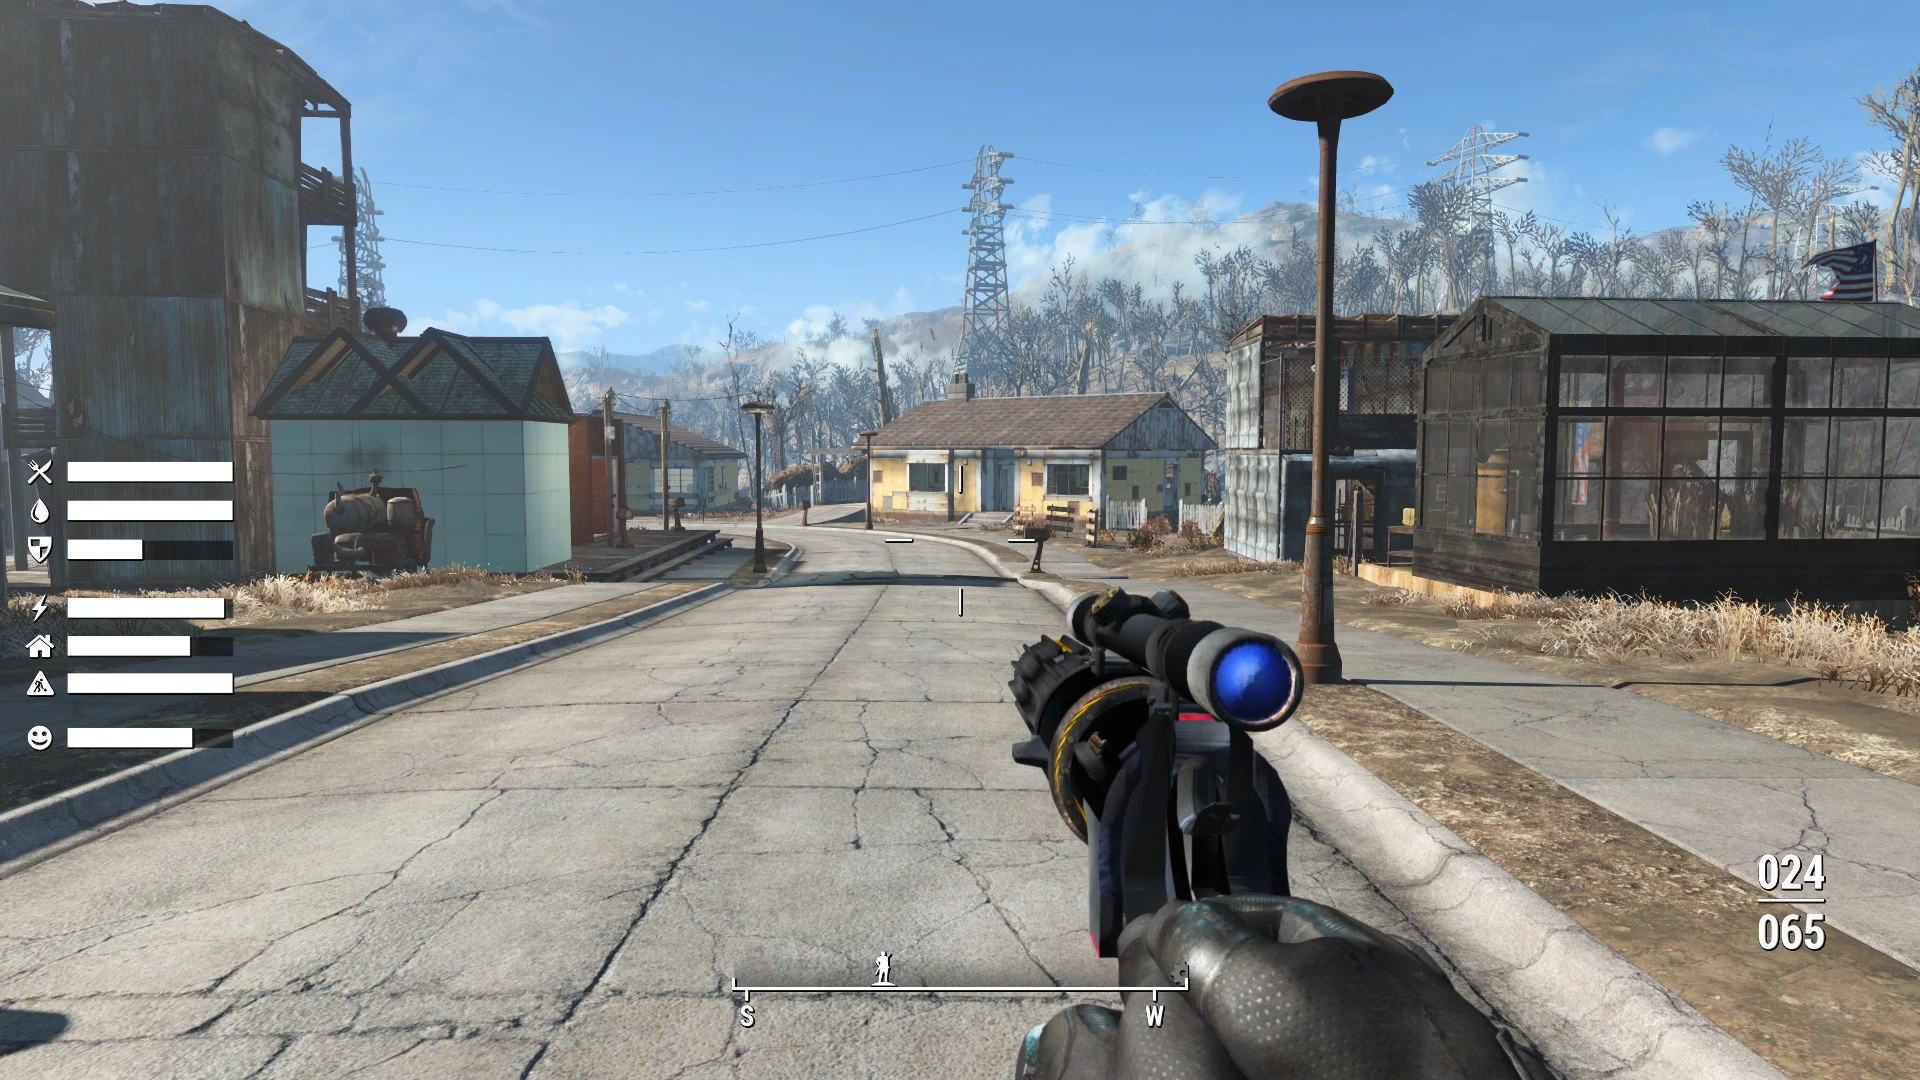 Fallout 4 first person view